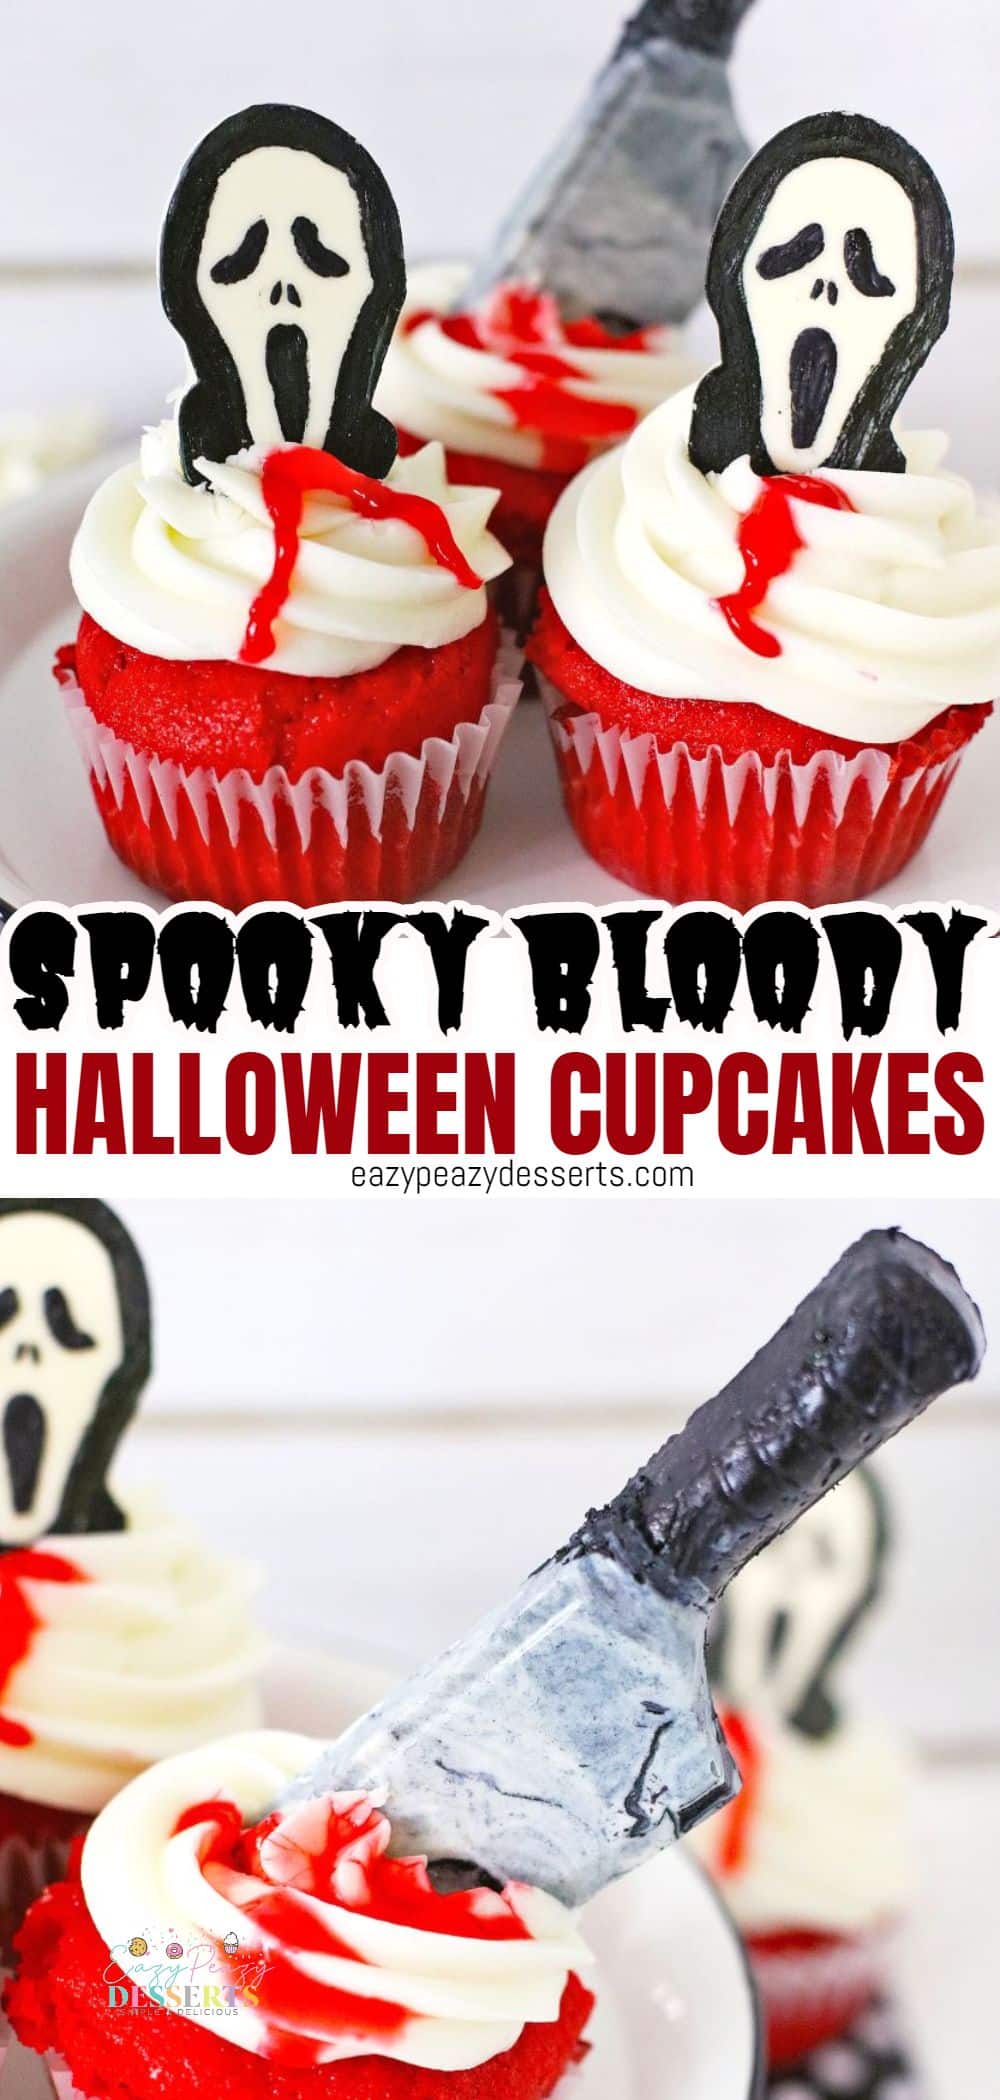 Photo collage of Halloween cupcakes decorated with chocolate scream and knife decorations